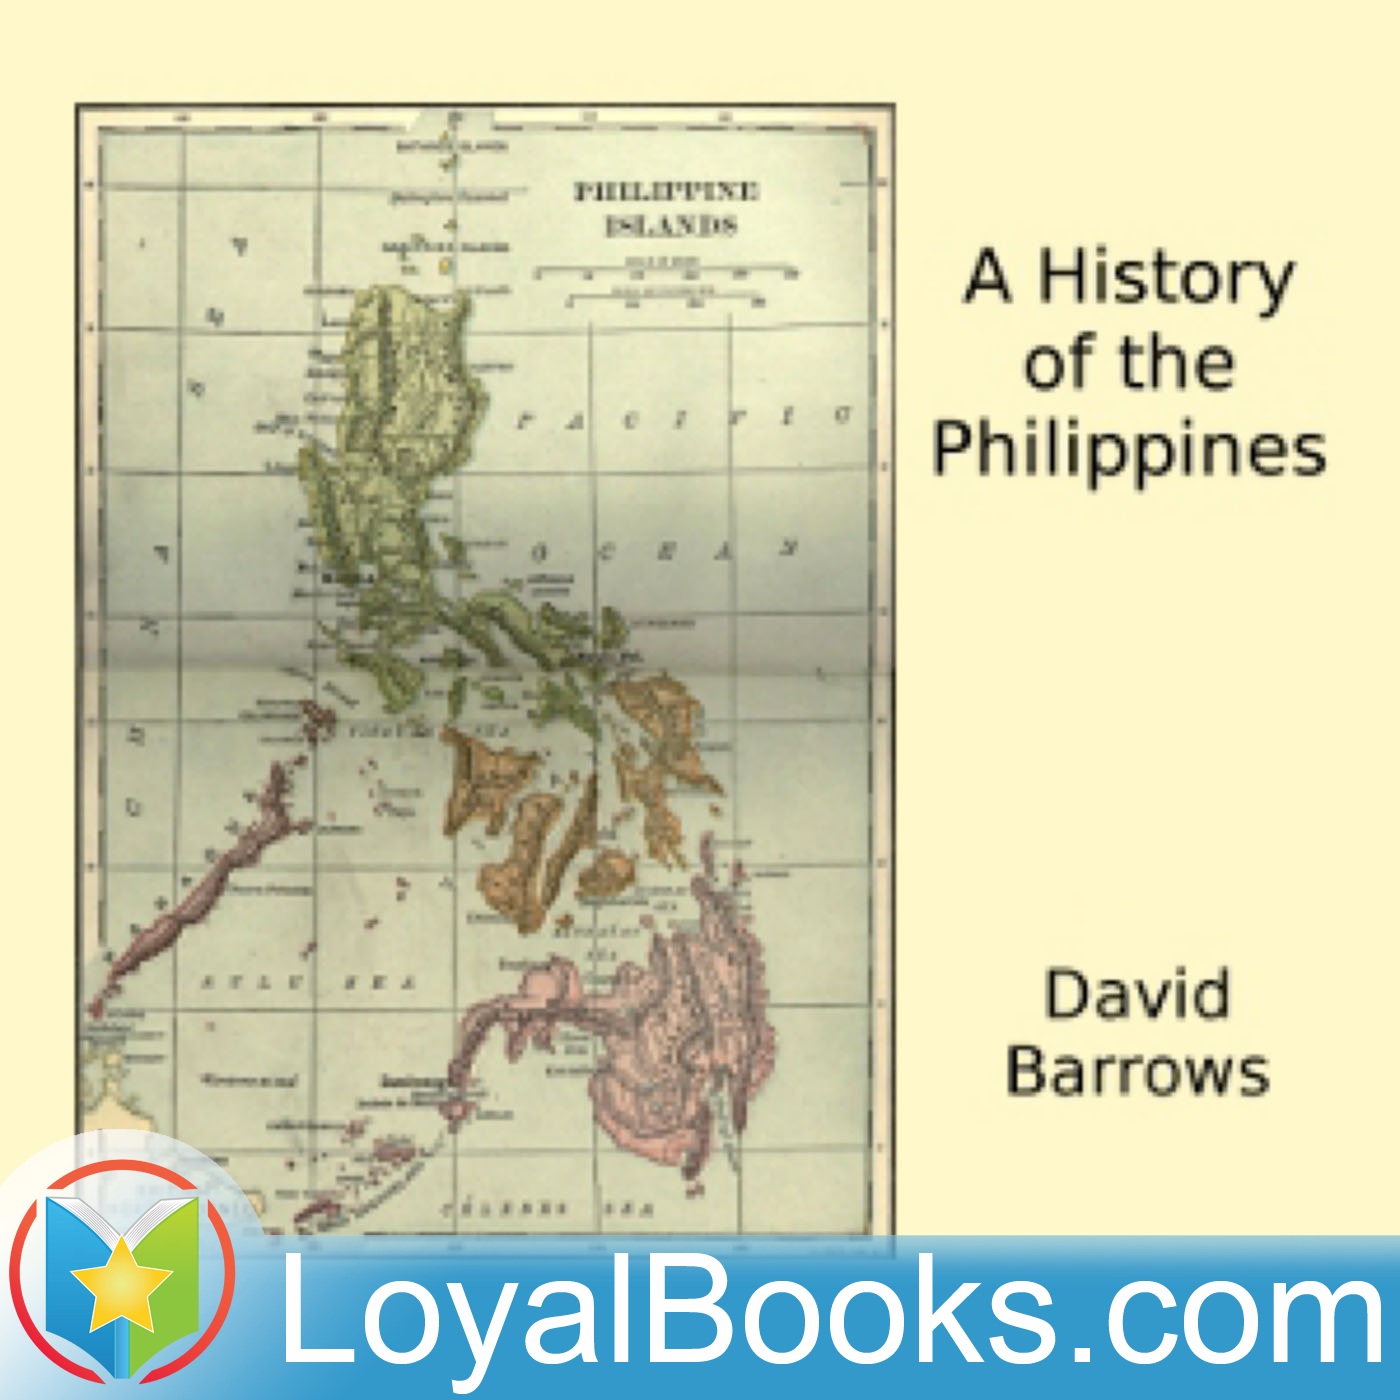 A History of the Philippines by David Barrows